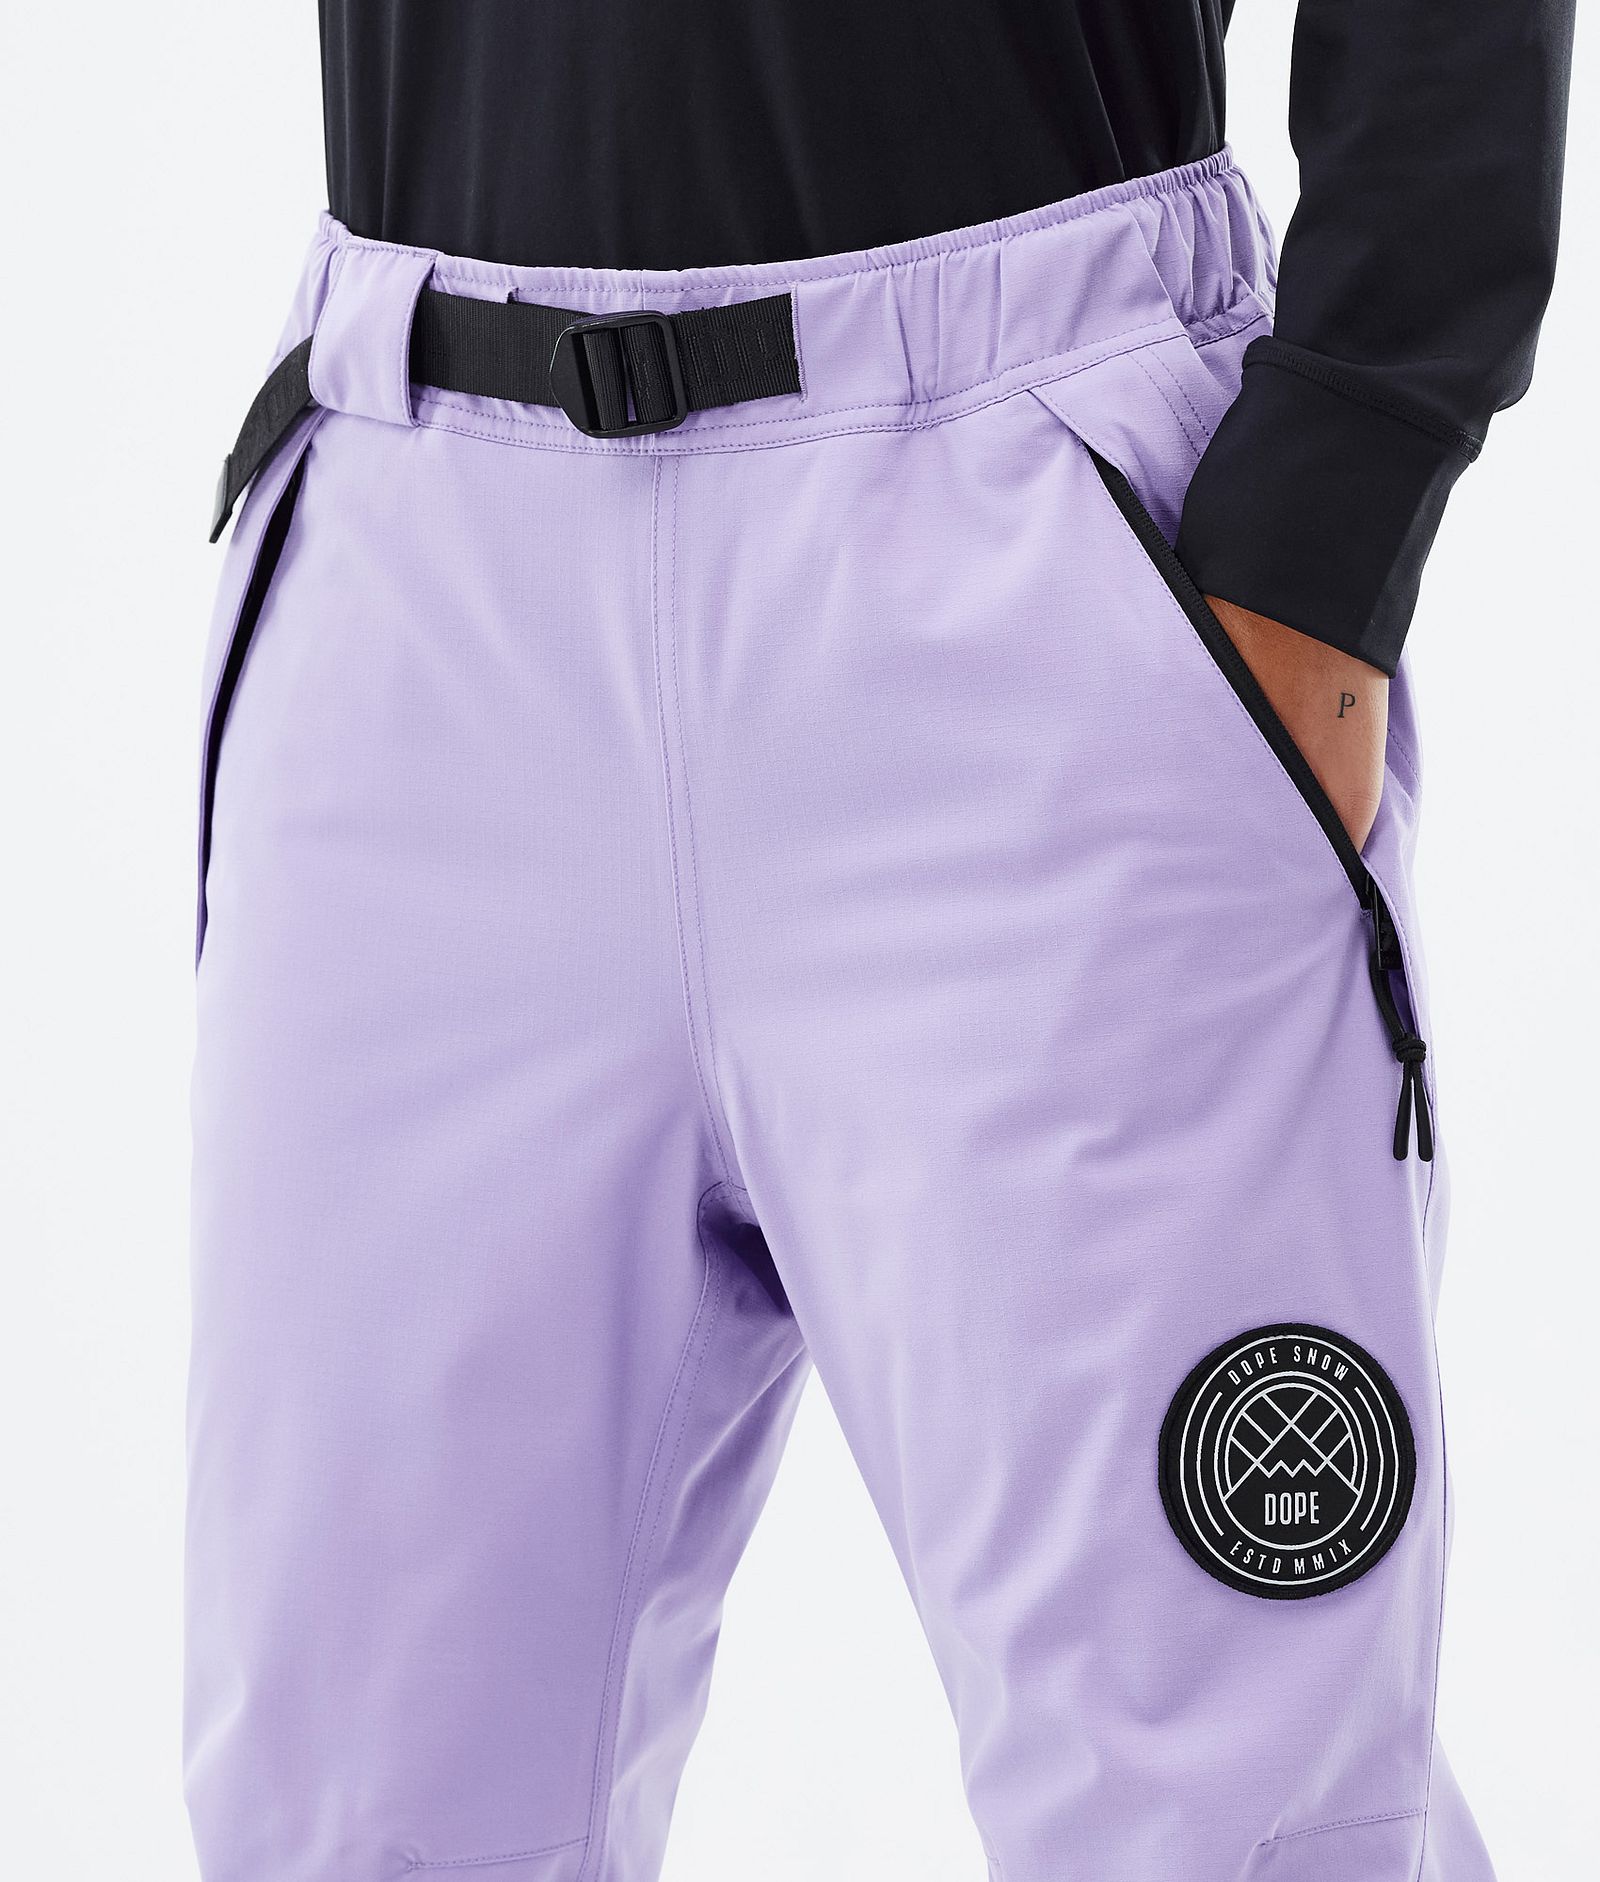 Blizzard W 2022 Snowboard Pants Women Faded Violet, Image 4 of 4